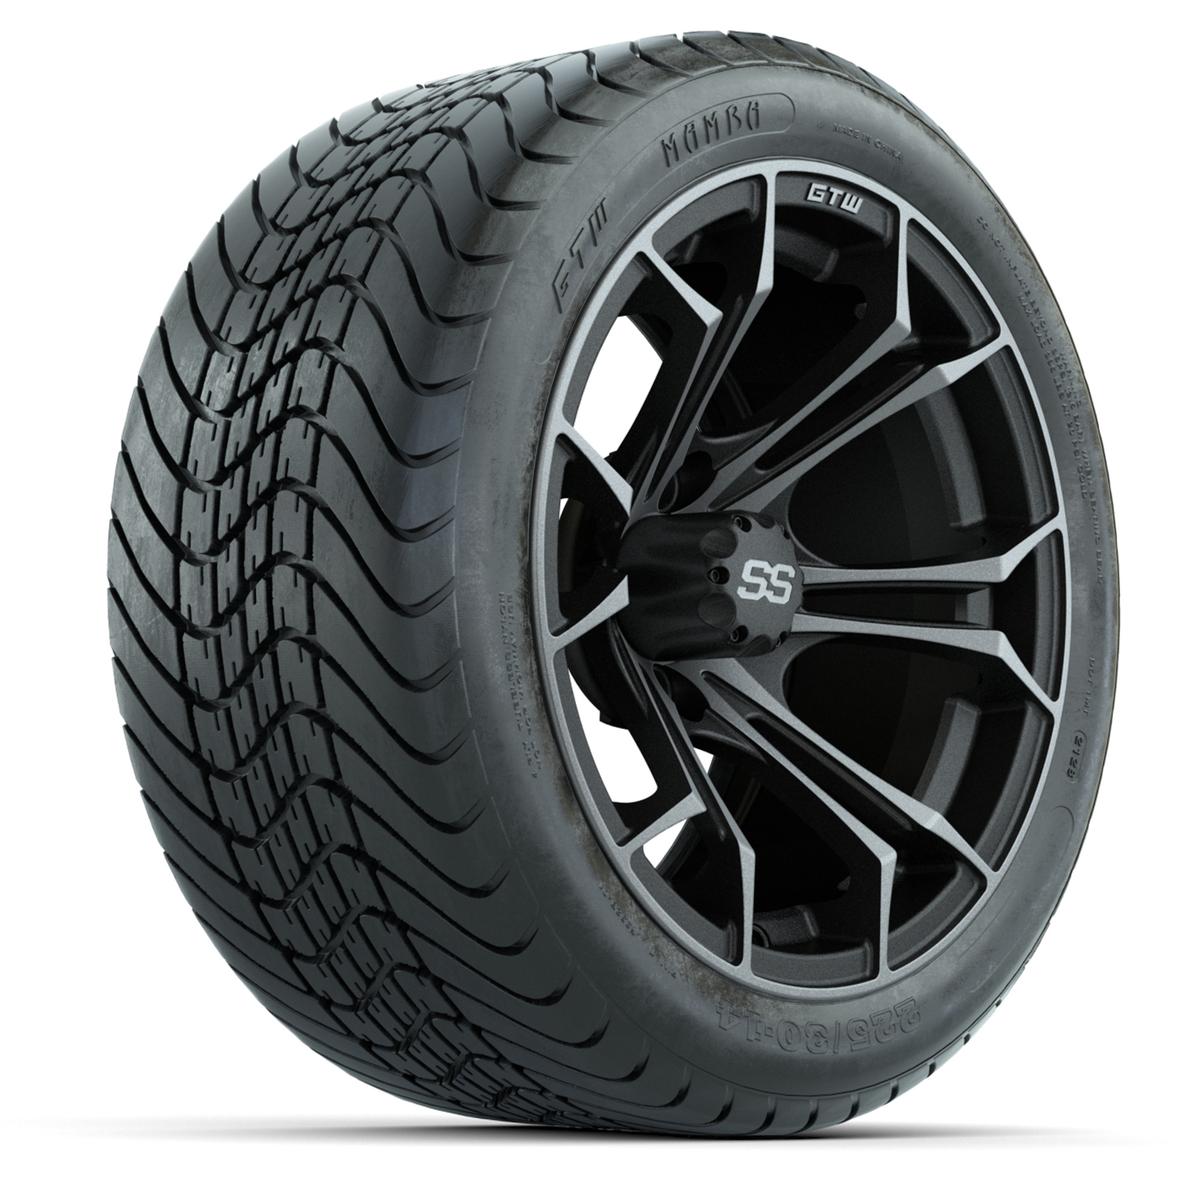 GTW Spyder Matte Grey 14 in Wheels with 225/30-14 Mamba Street Tires – Full Set